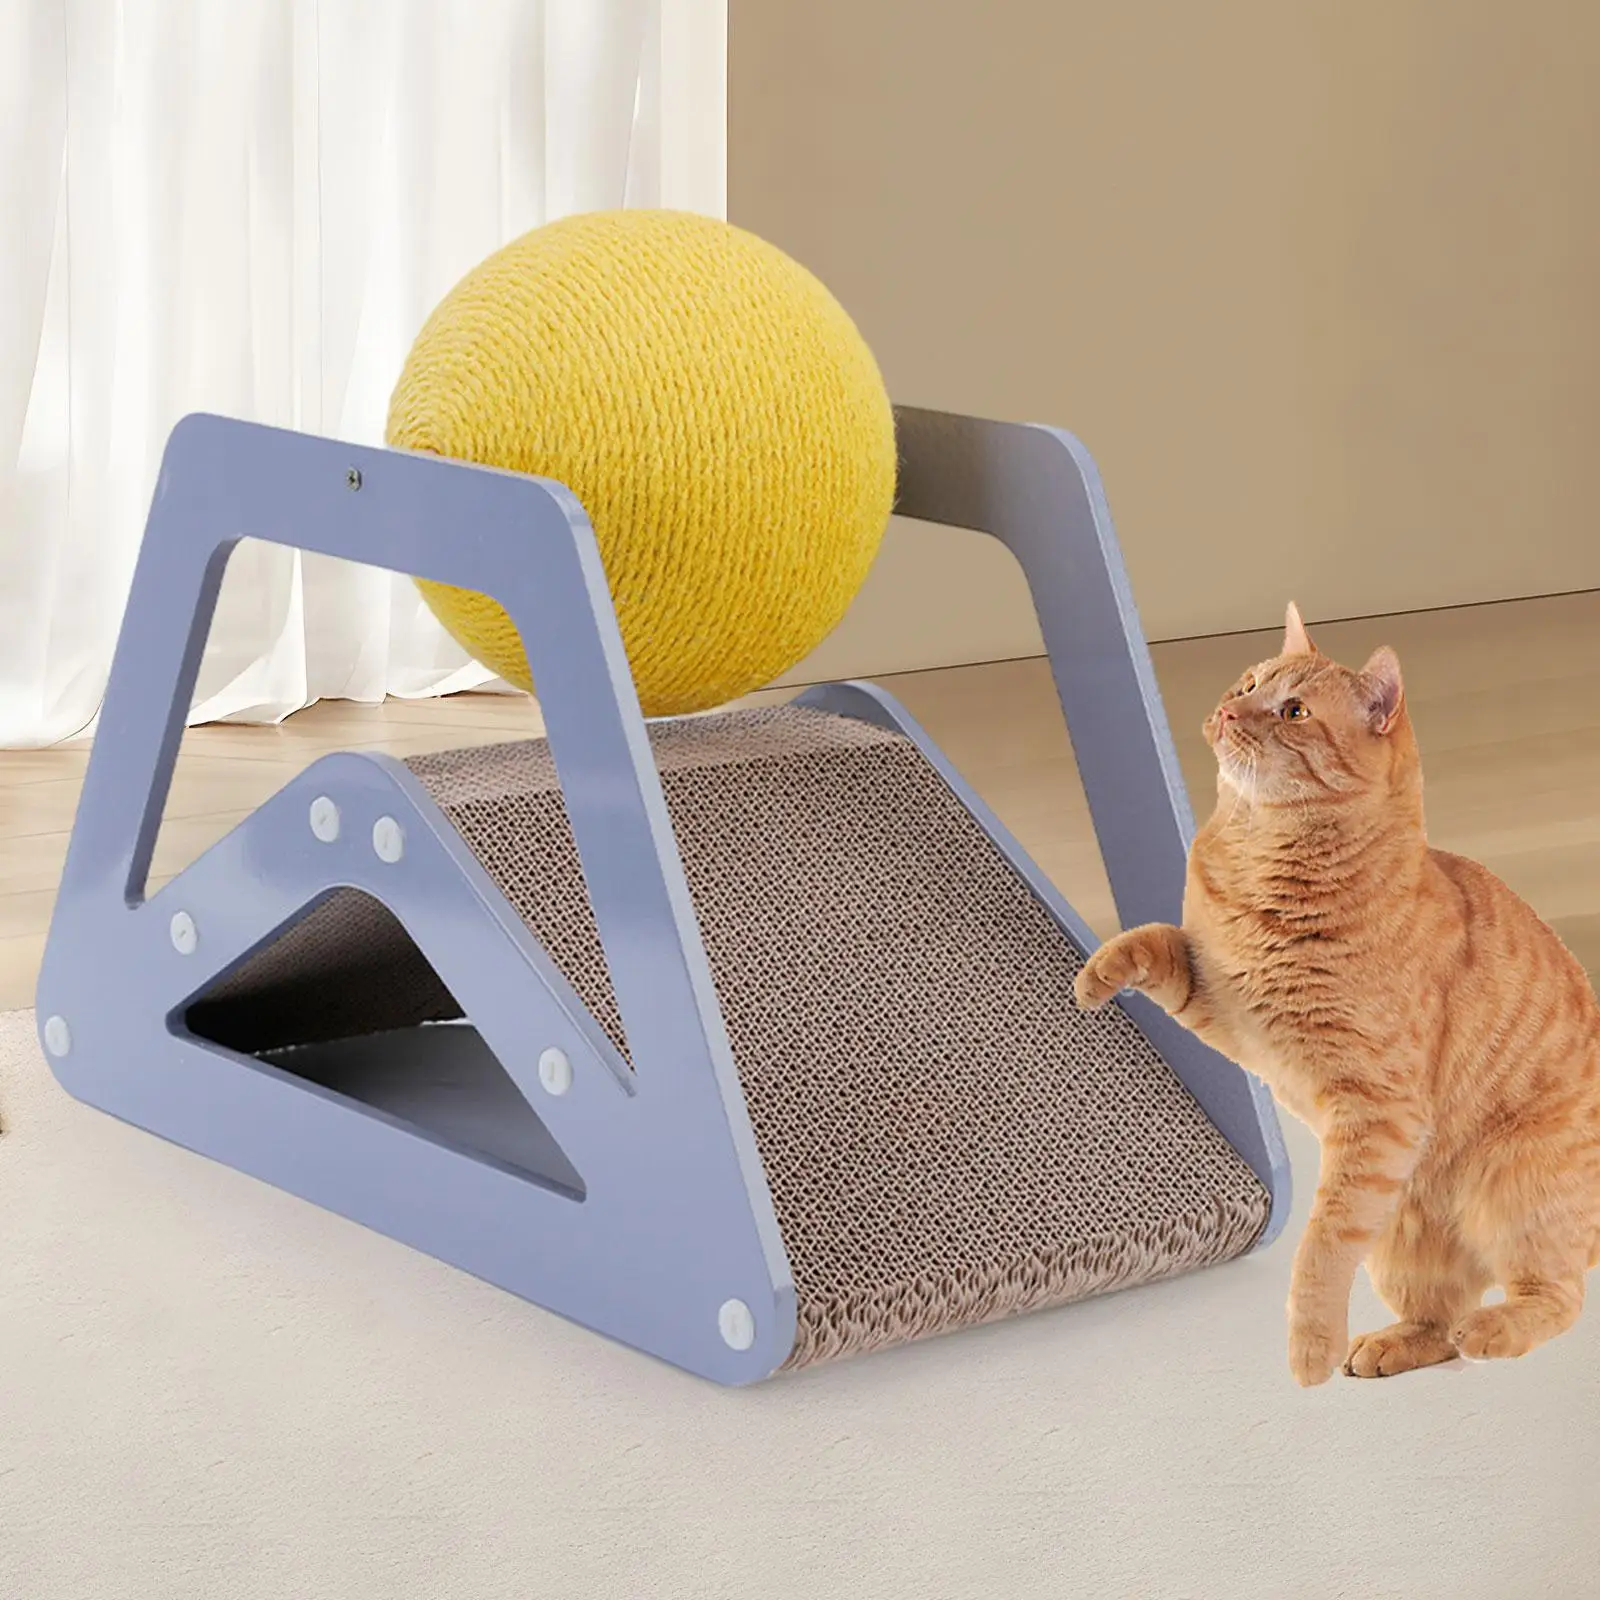 Sisal Cat Scratching Ball Pet Supplies Interactive Grinding Claw Cat Lounge Bed for Small Medium Large Cats Playing Sleeping